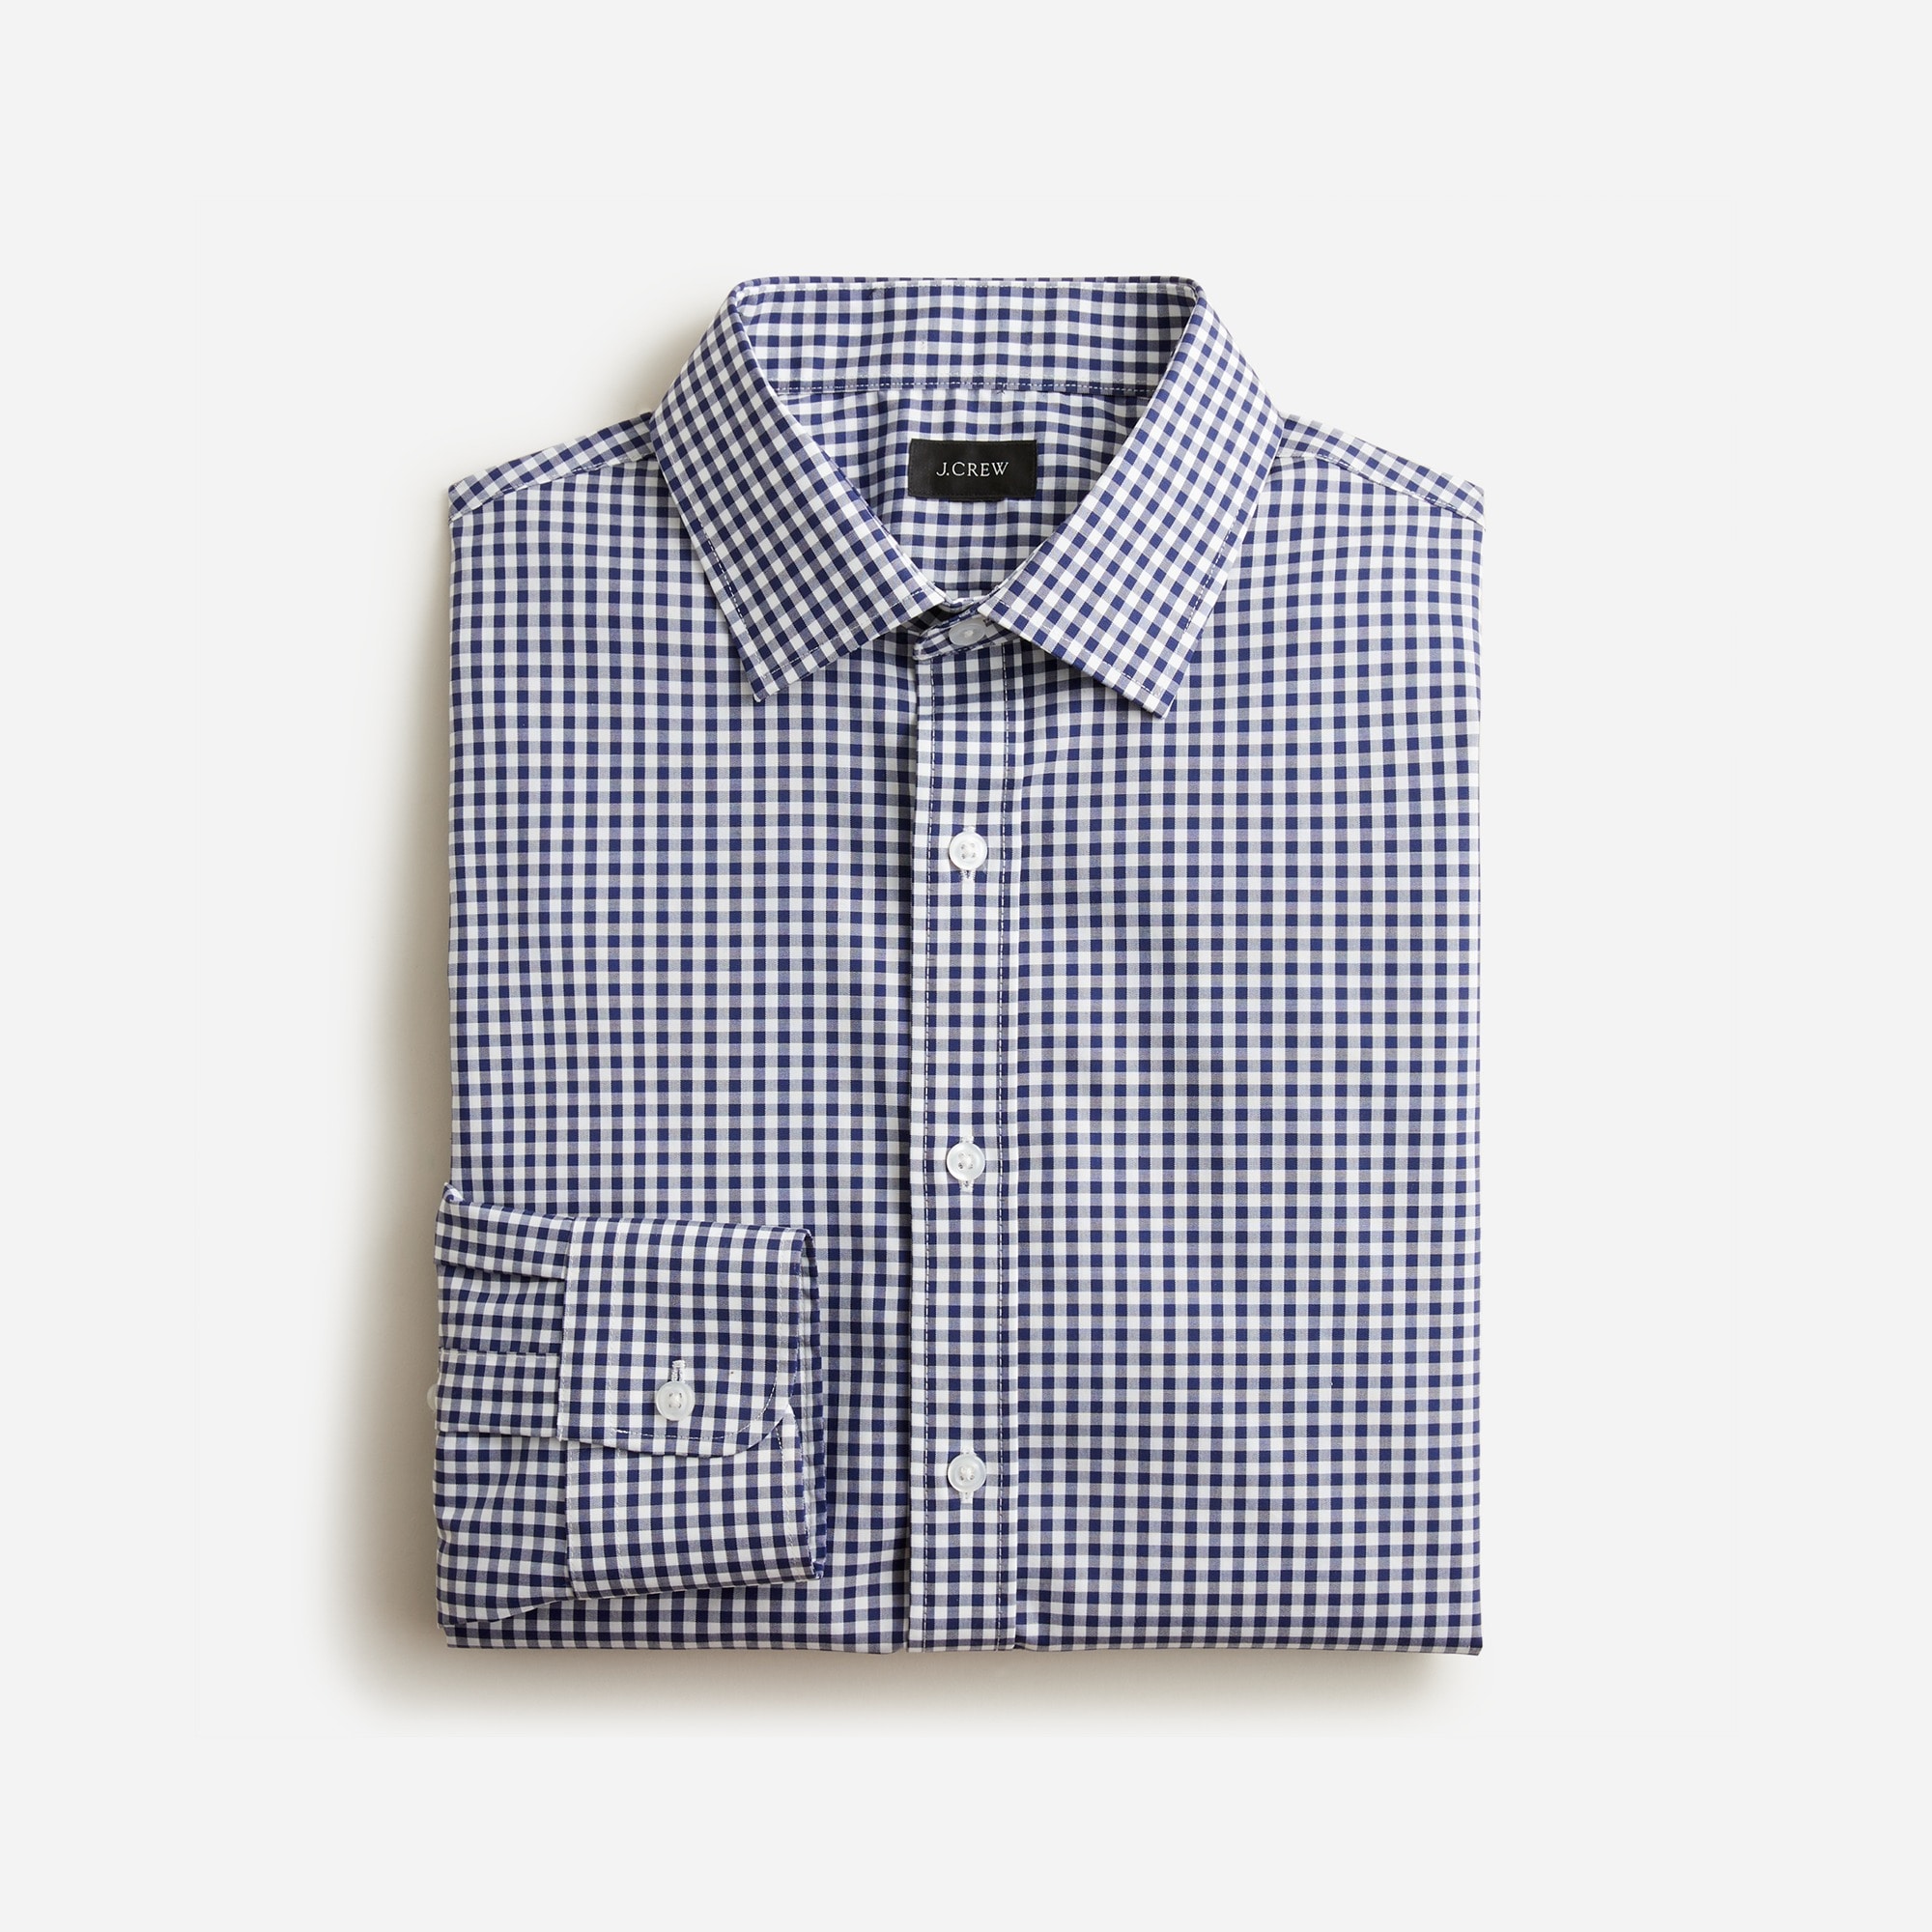 mens Tall Bowery wrinkle-free dress shirt with spread collar